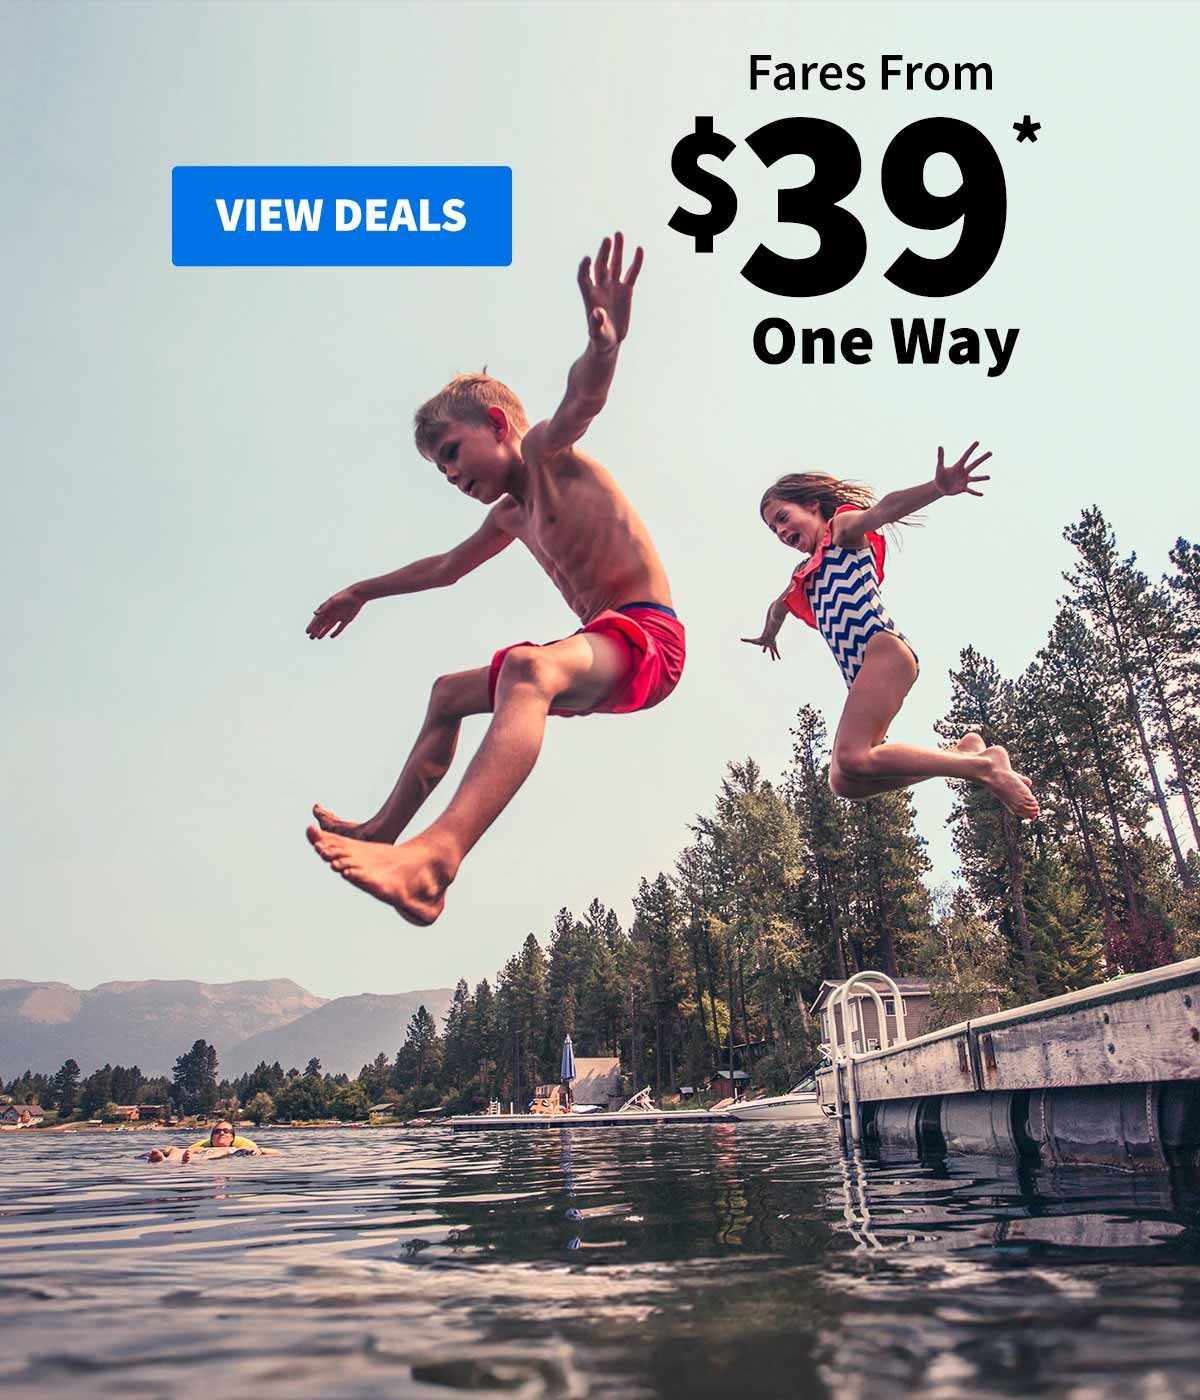 Fares From $39* One Way